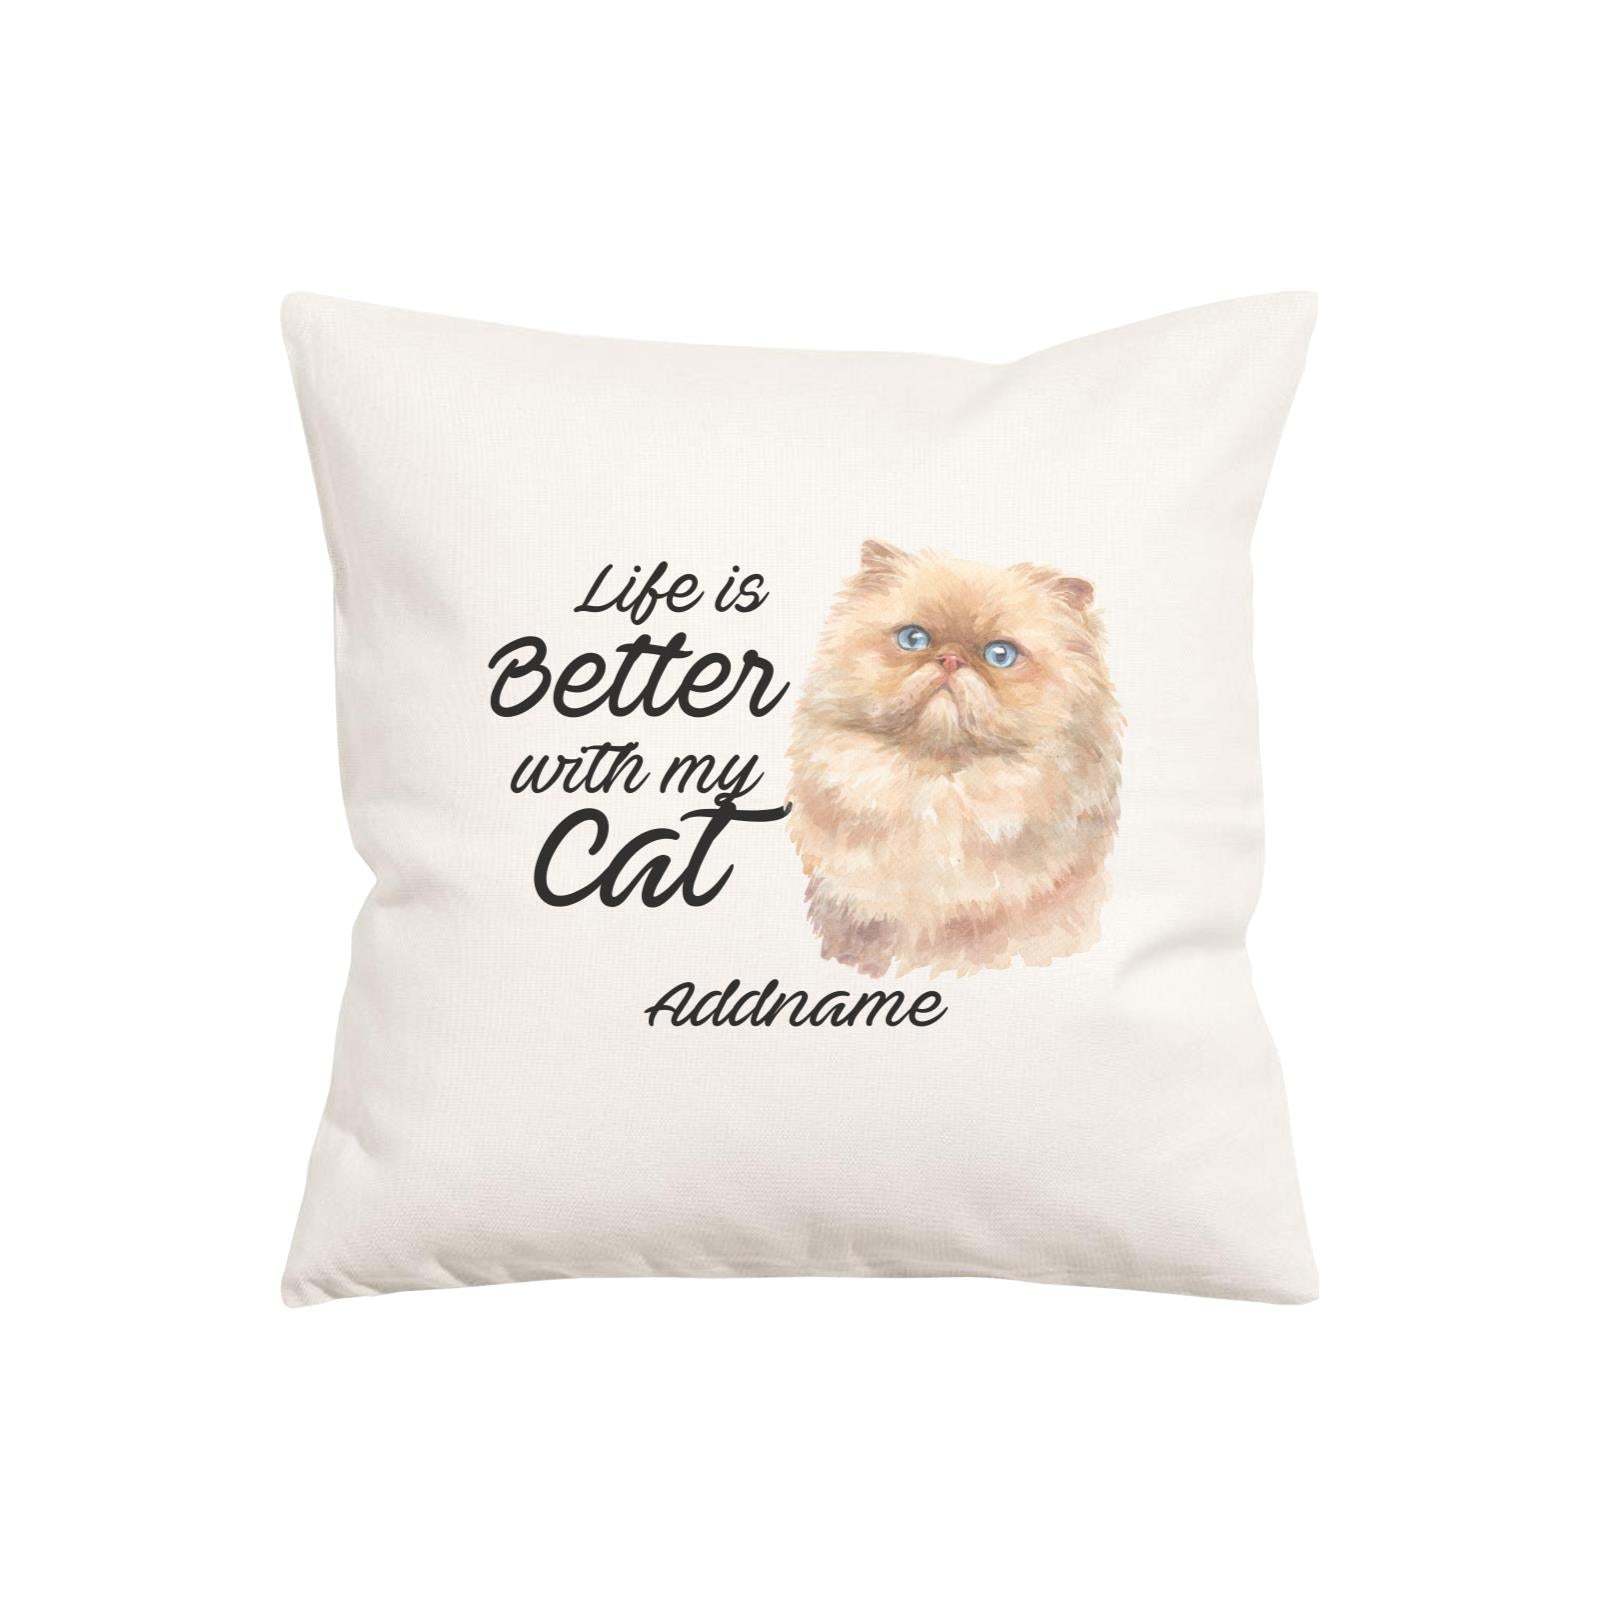 Watercolor Life is Better With My Cat Persian Light Brown Cat Addname Pillow Cushion